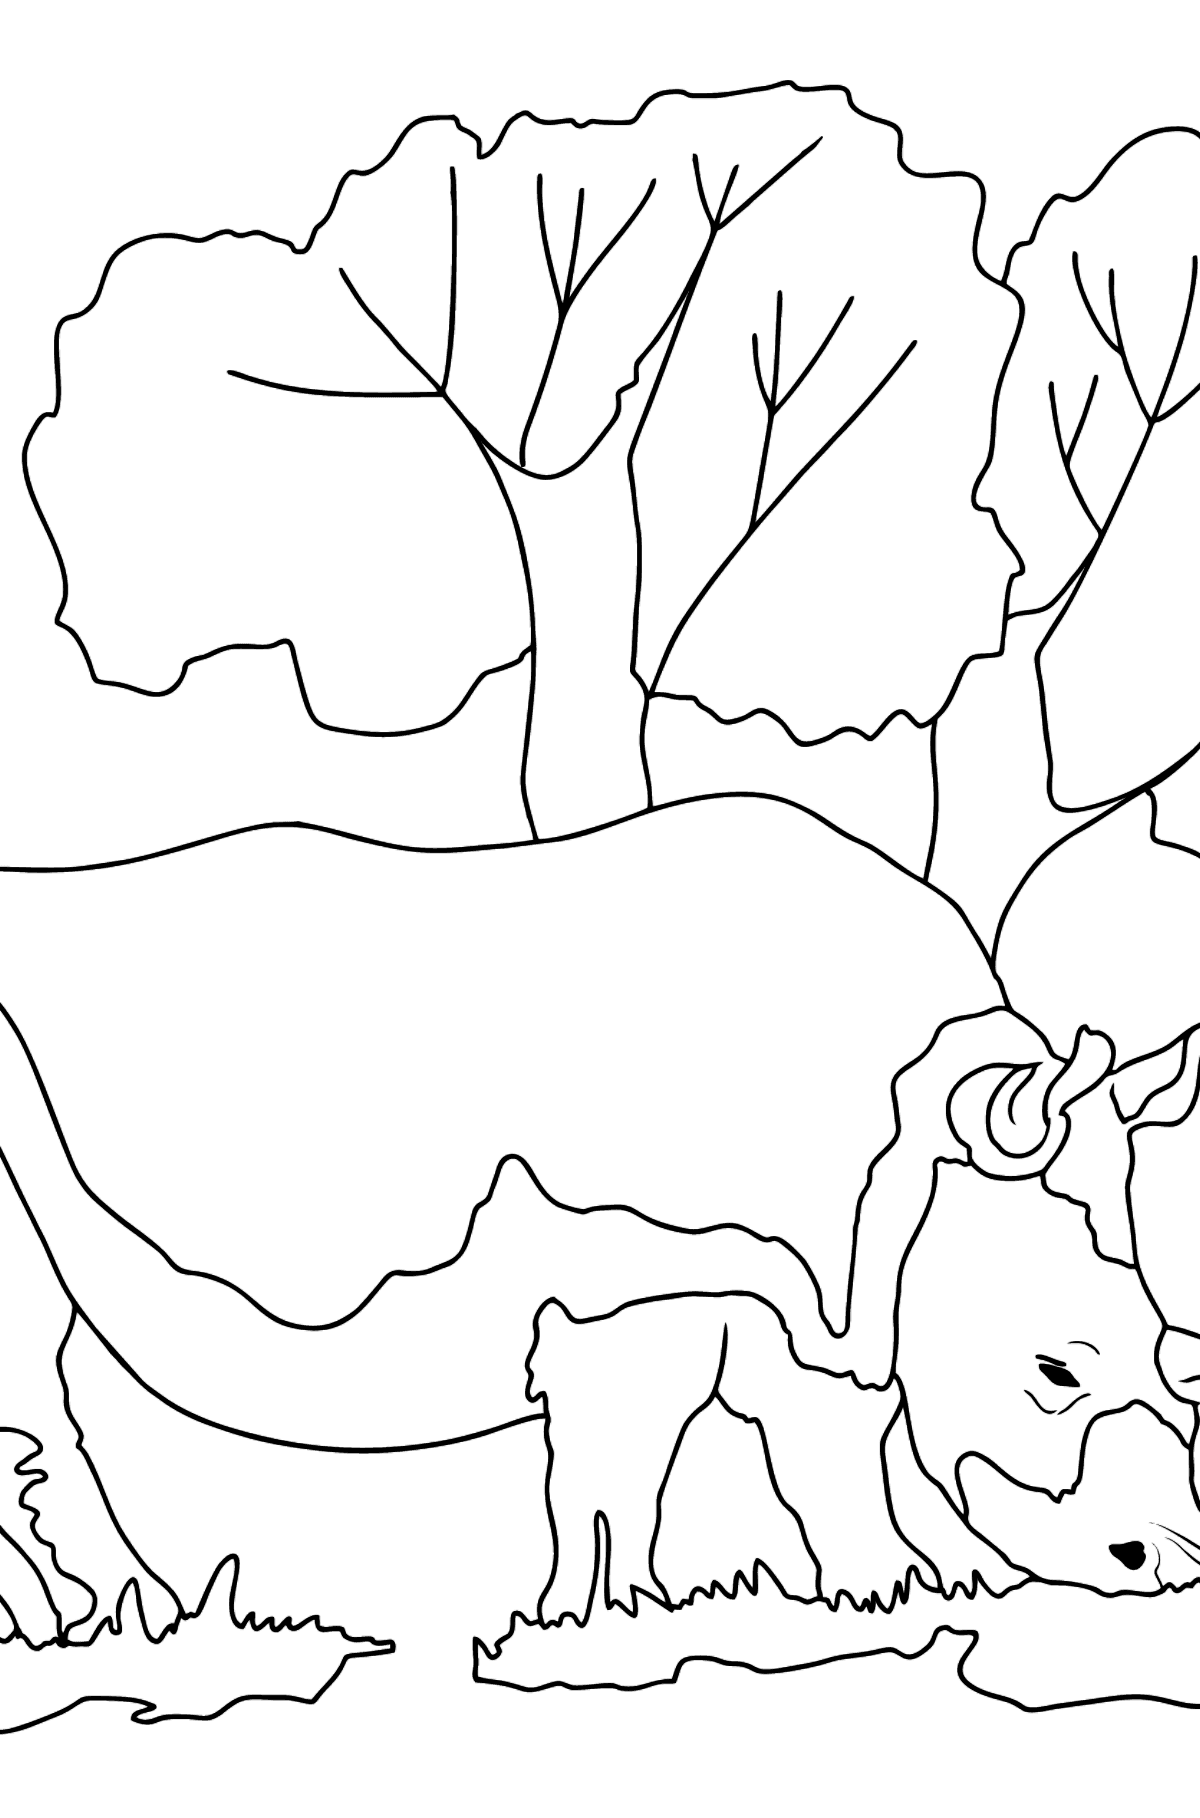 Coloring Page - A Massive Rhino - Coloring Pages for Kids